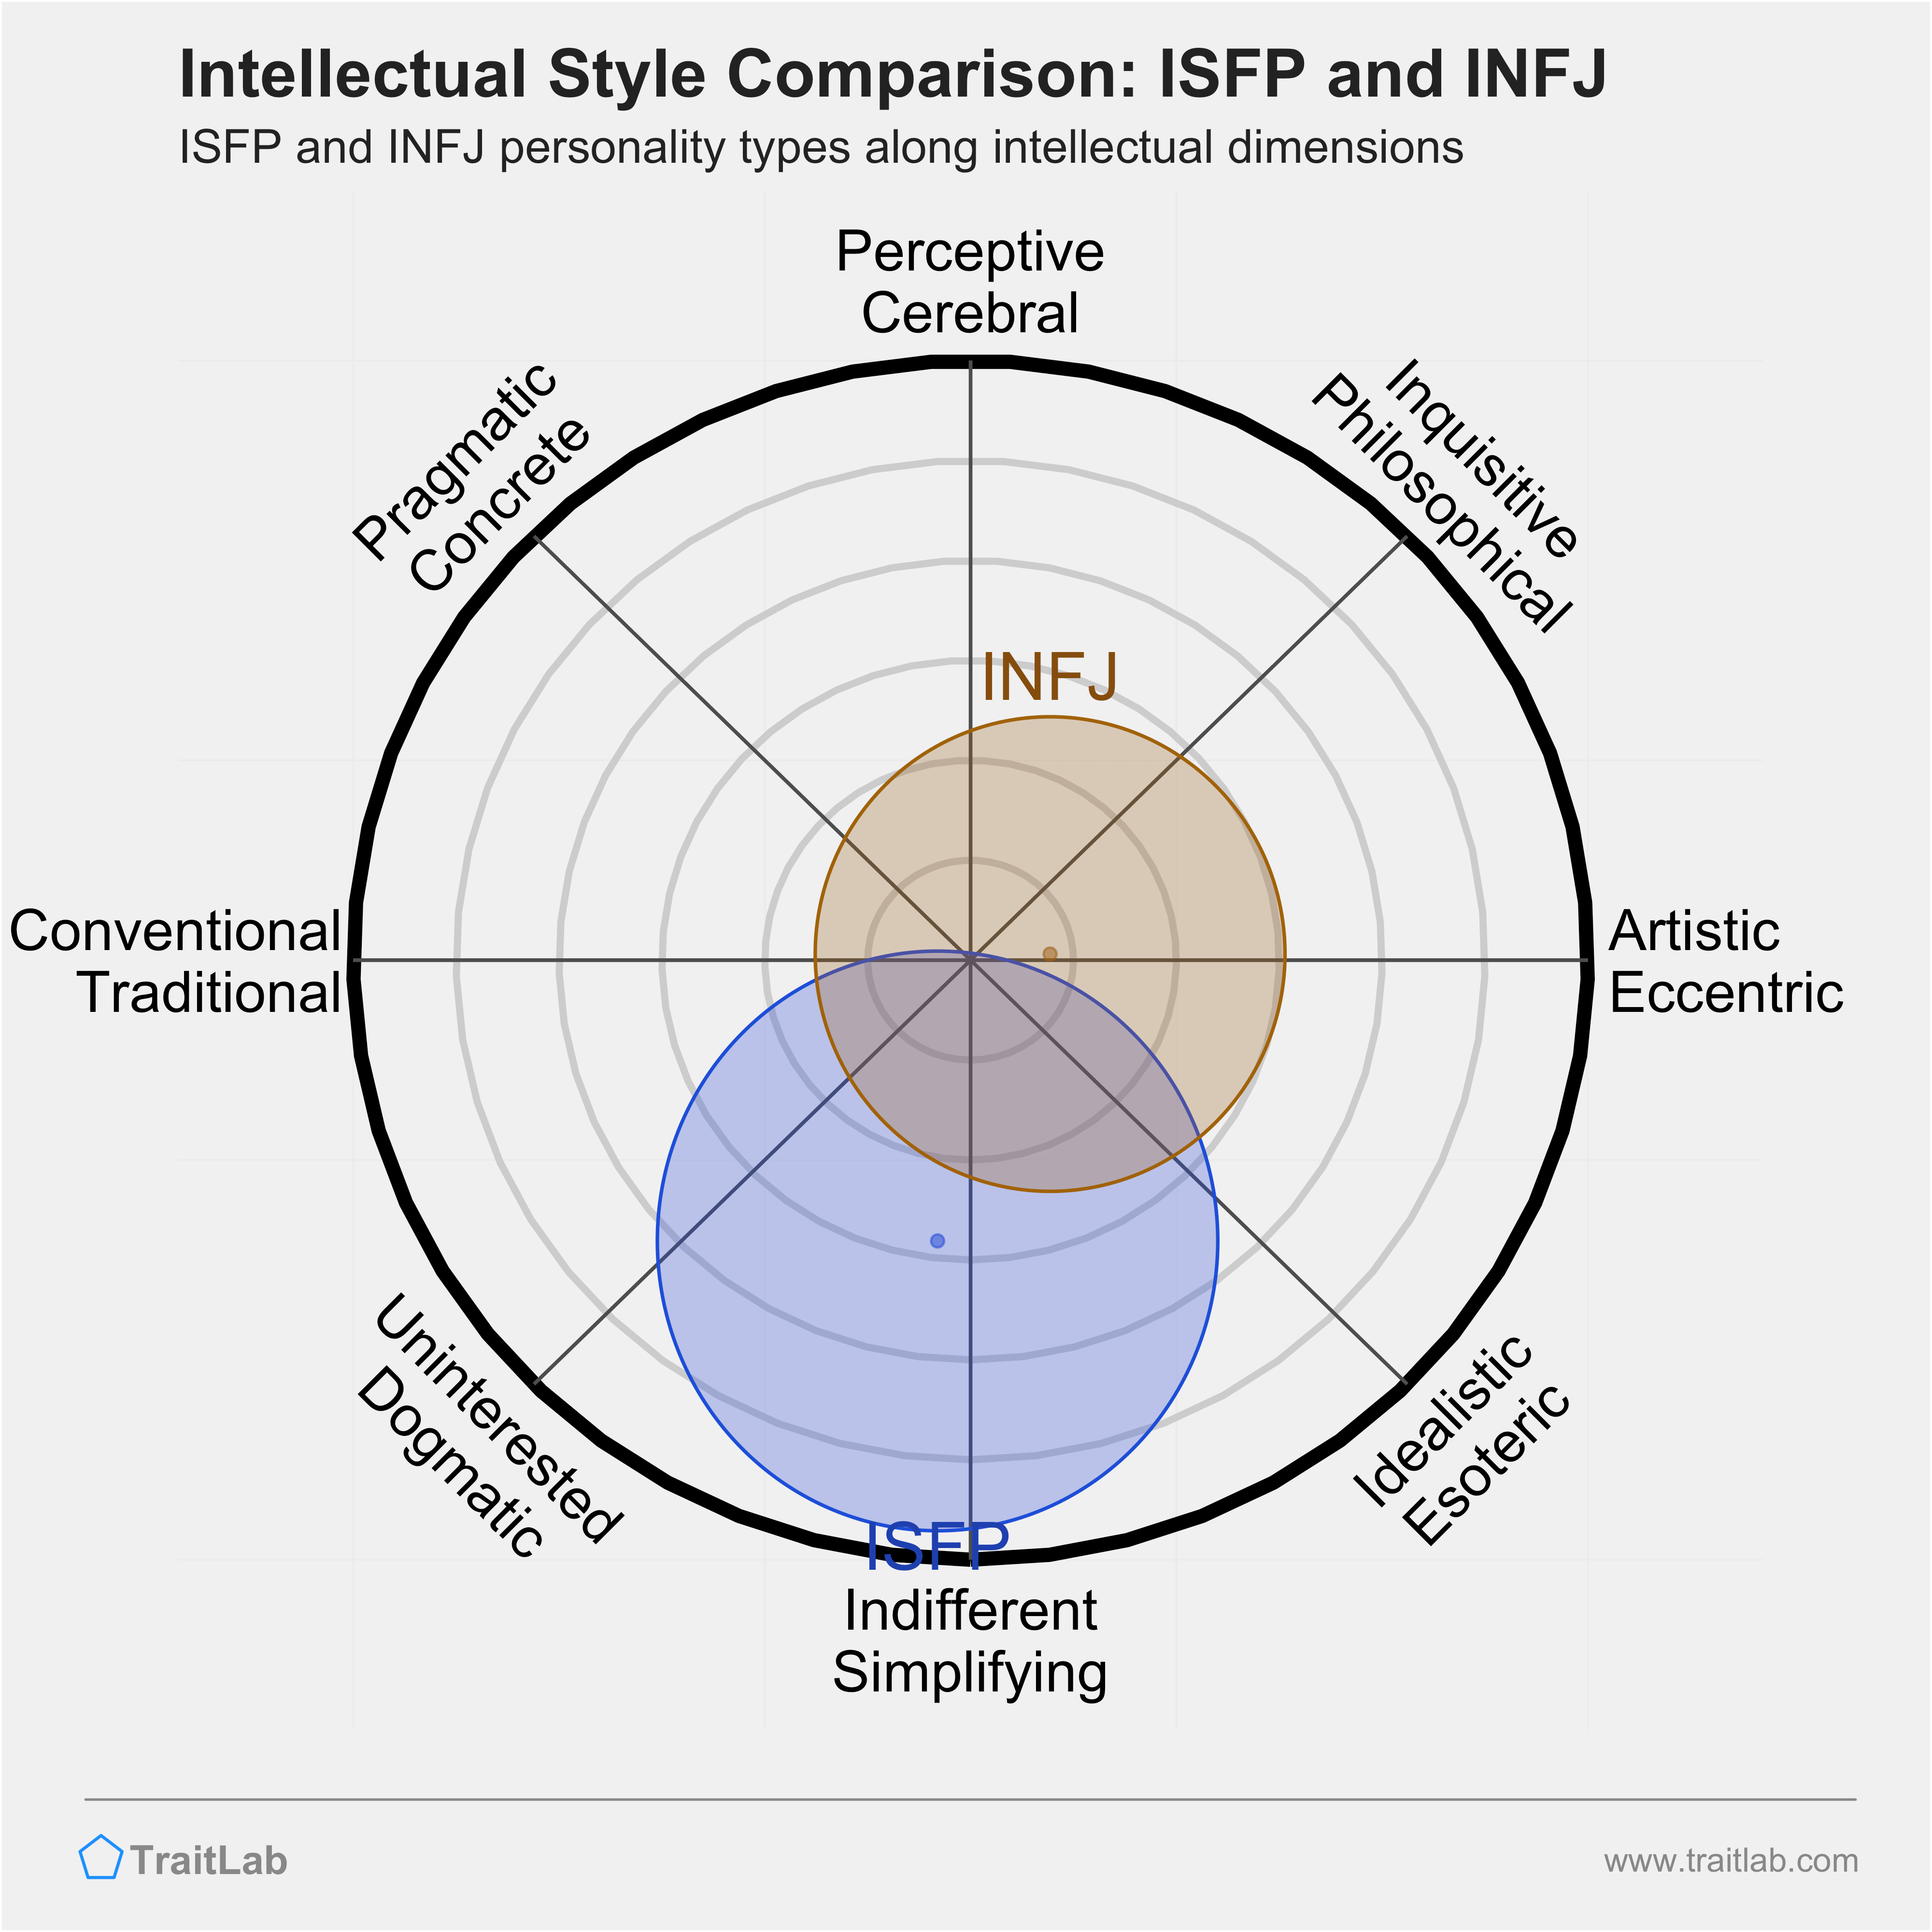 ISFP and INFJ comparison across intellectual dimensions